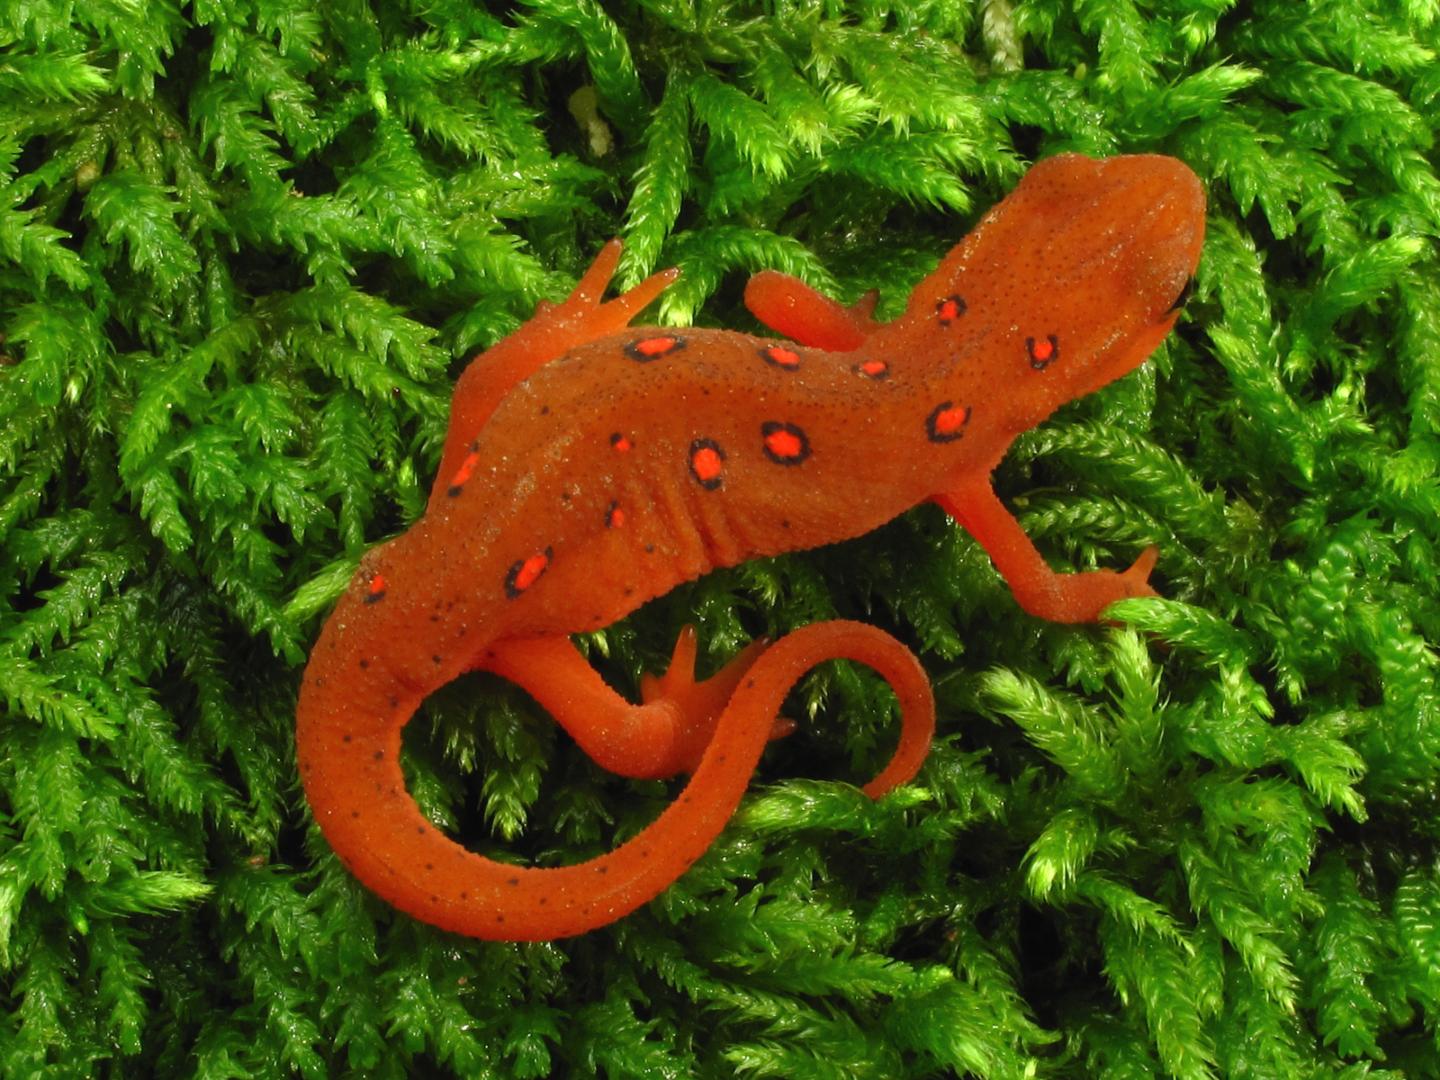 Eft Stage of a Red-Spotted Newt